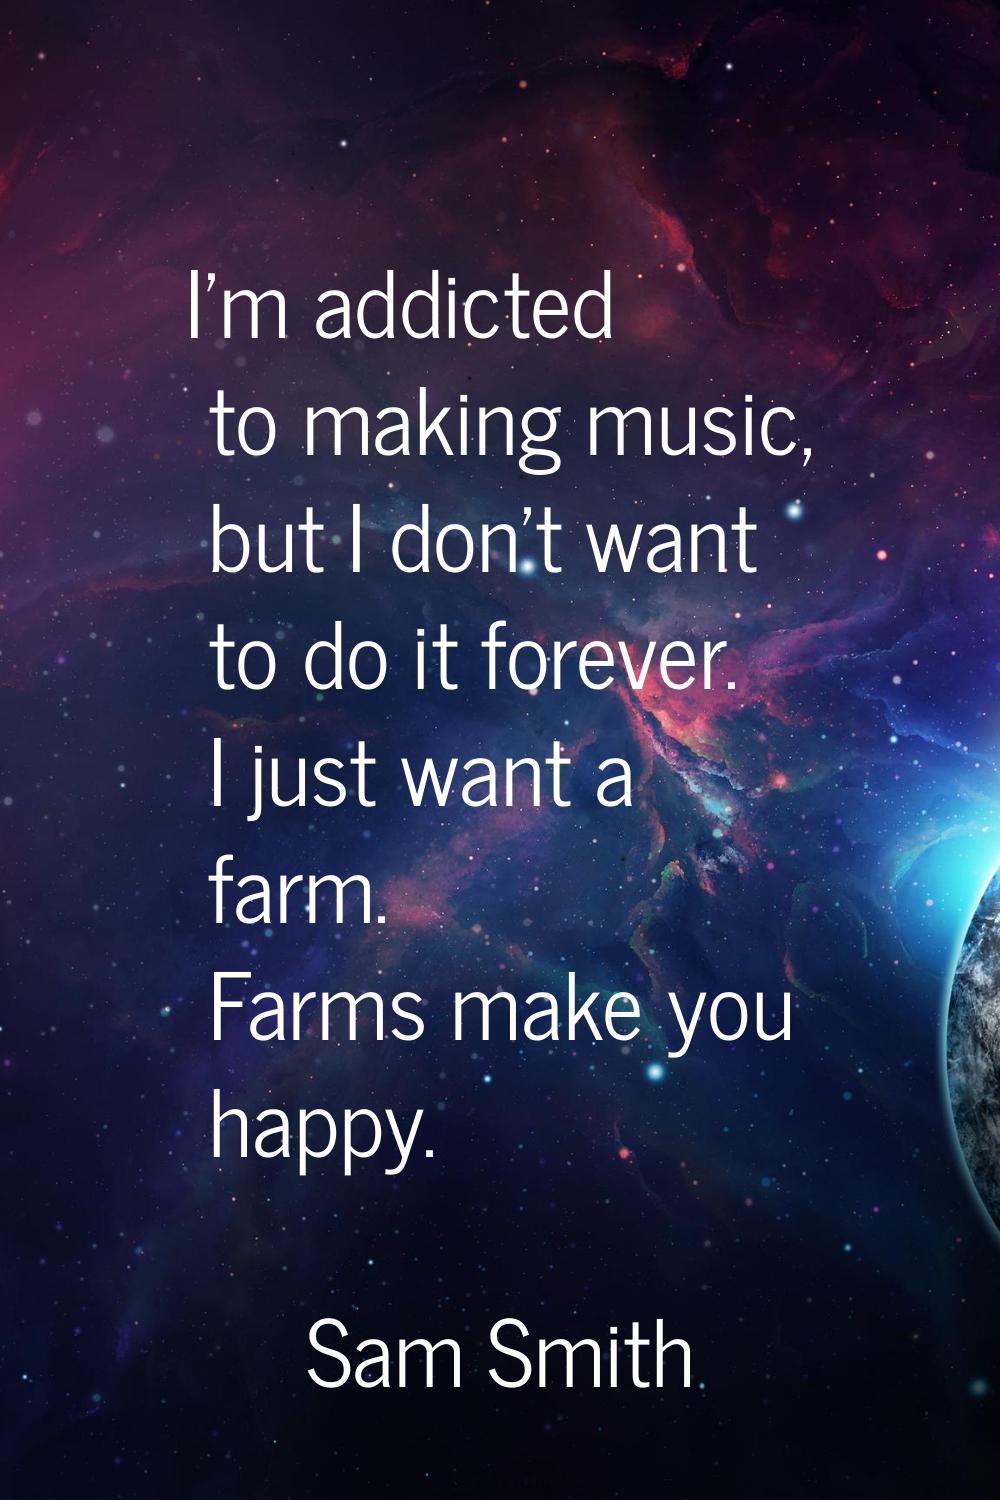 I'm addicted to making music, but I don't want to do it forever. I just want a farm. Farms make you